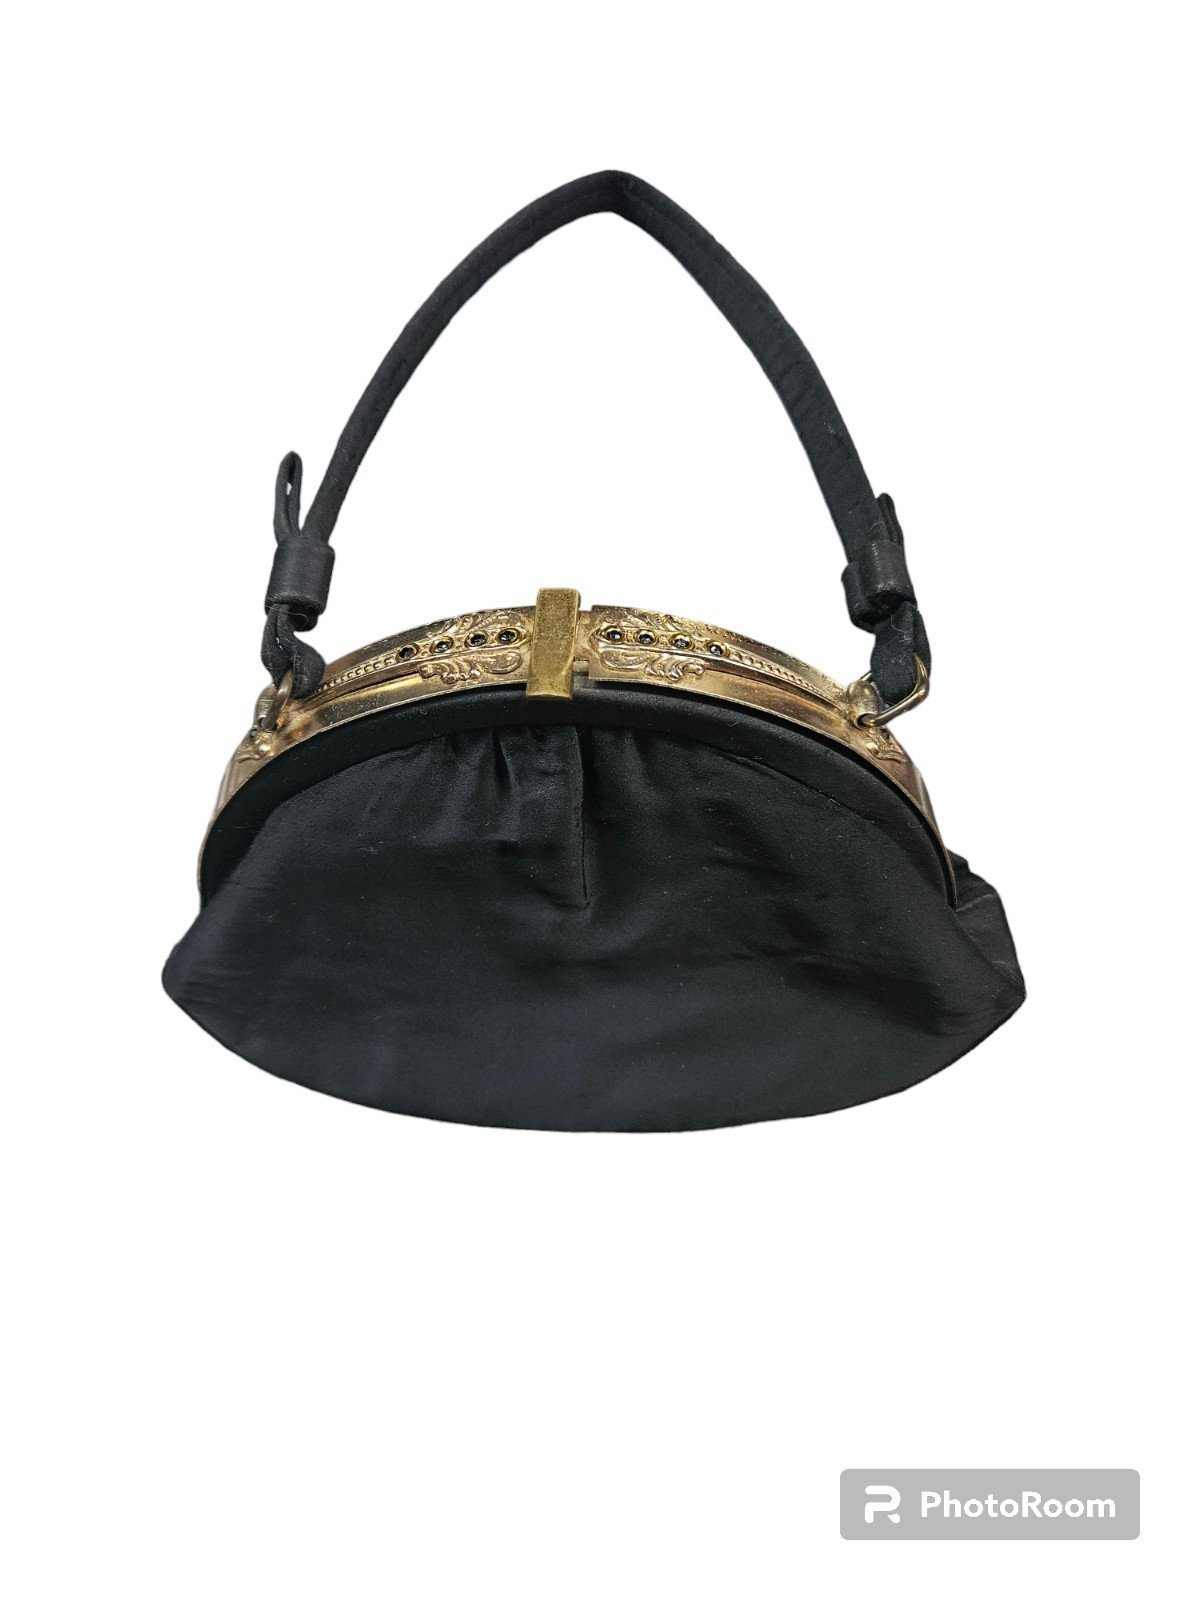 Vintage After 5 Evening Bag Black and Gold w/ Accessories diEJWSFEd